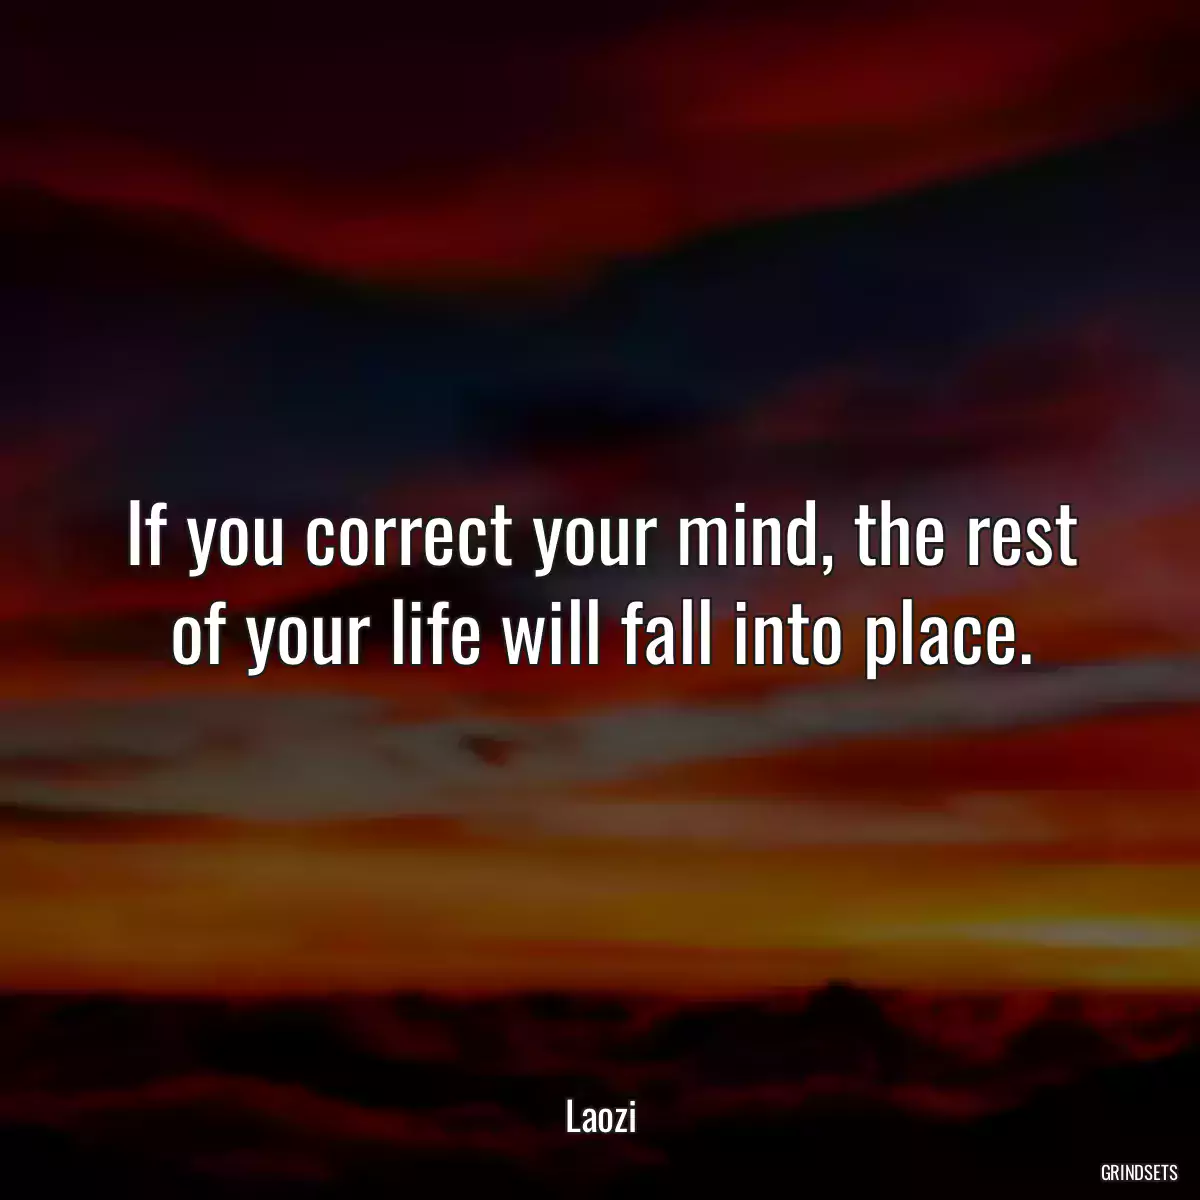 If you correct your mind, the rest of your life will fall into place.